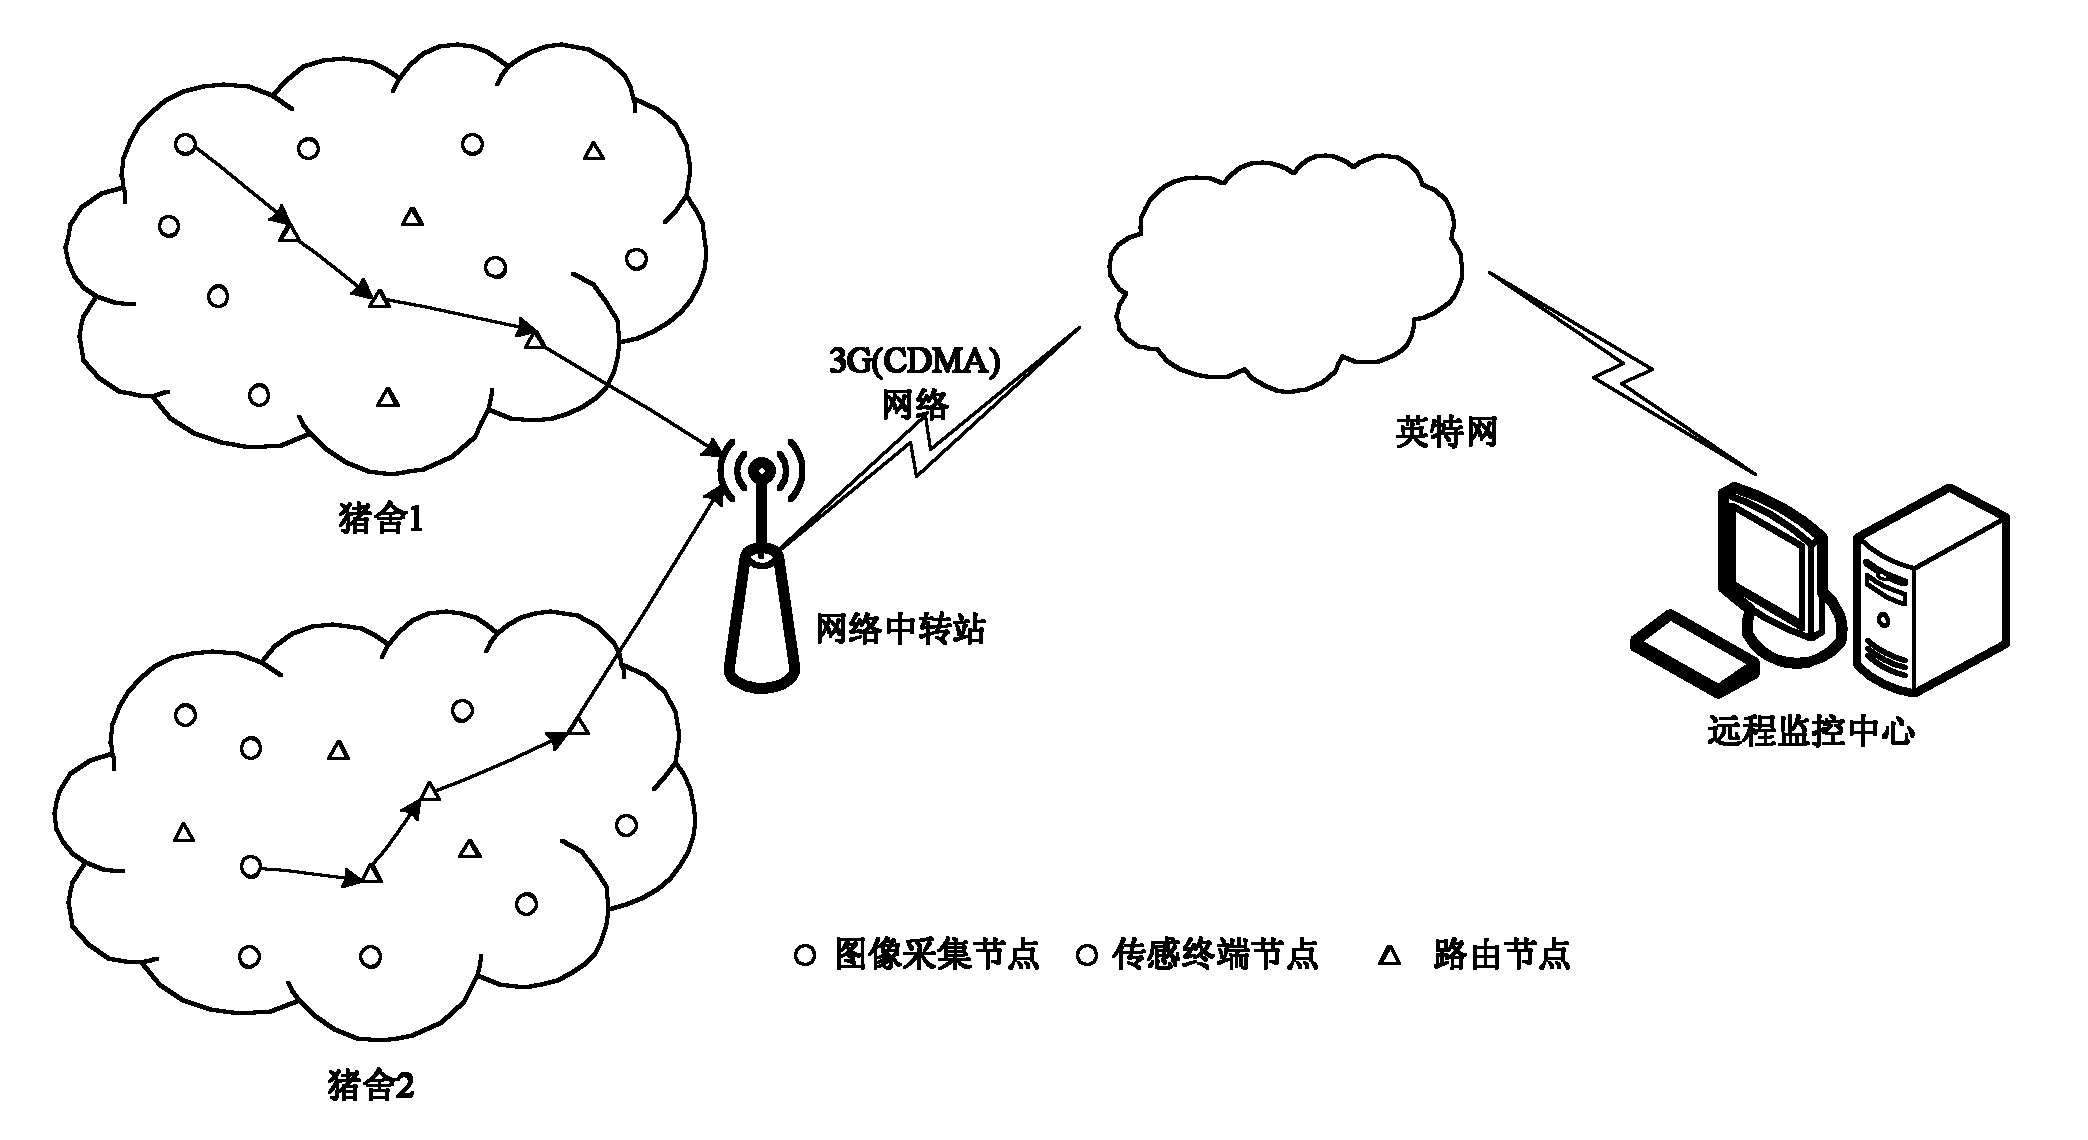 Wireless multimedia sensor network-based system and method for monitoring information of livestock and poultry facility welfare breeding environment